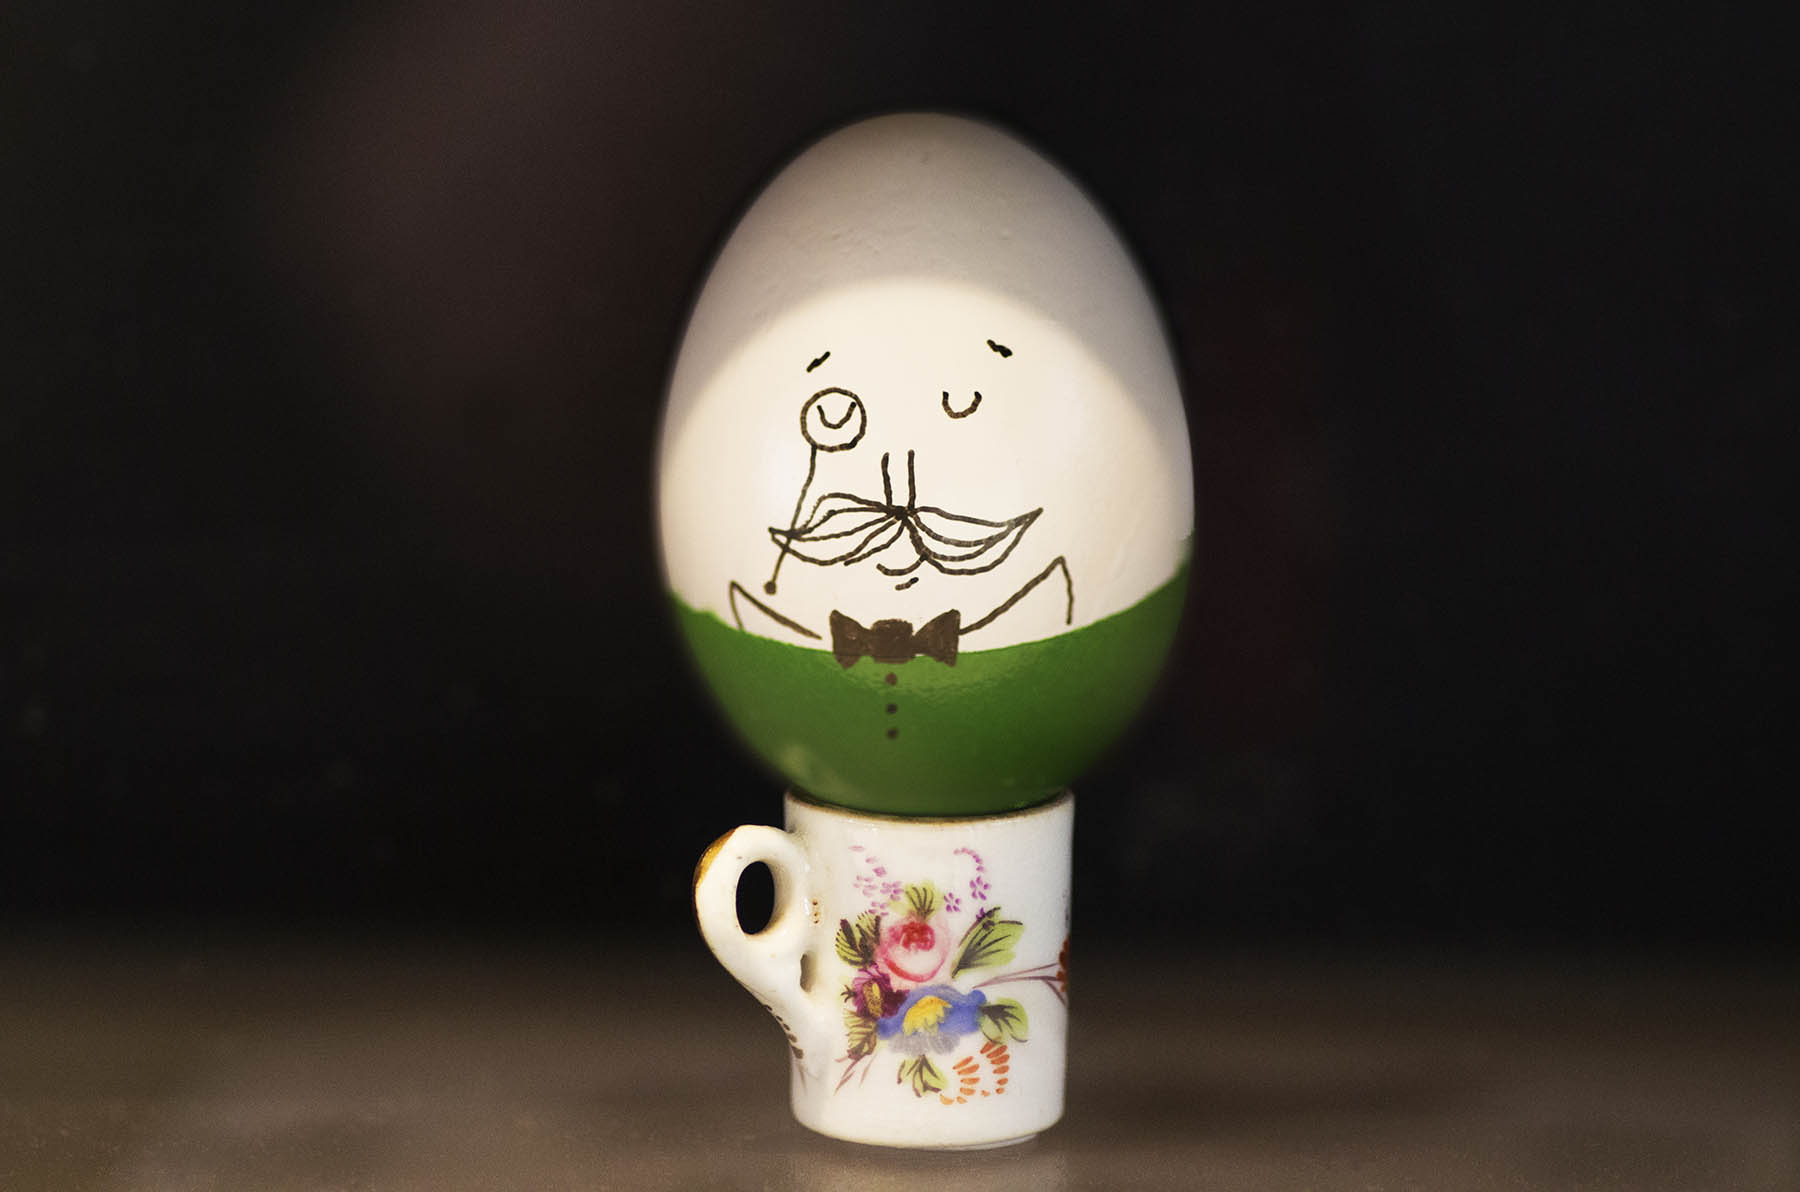 Annoushka Milestones Exhibition display cabinet - Painted Humpty Dumpty  egg on tiny cup